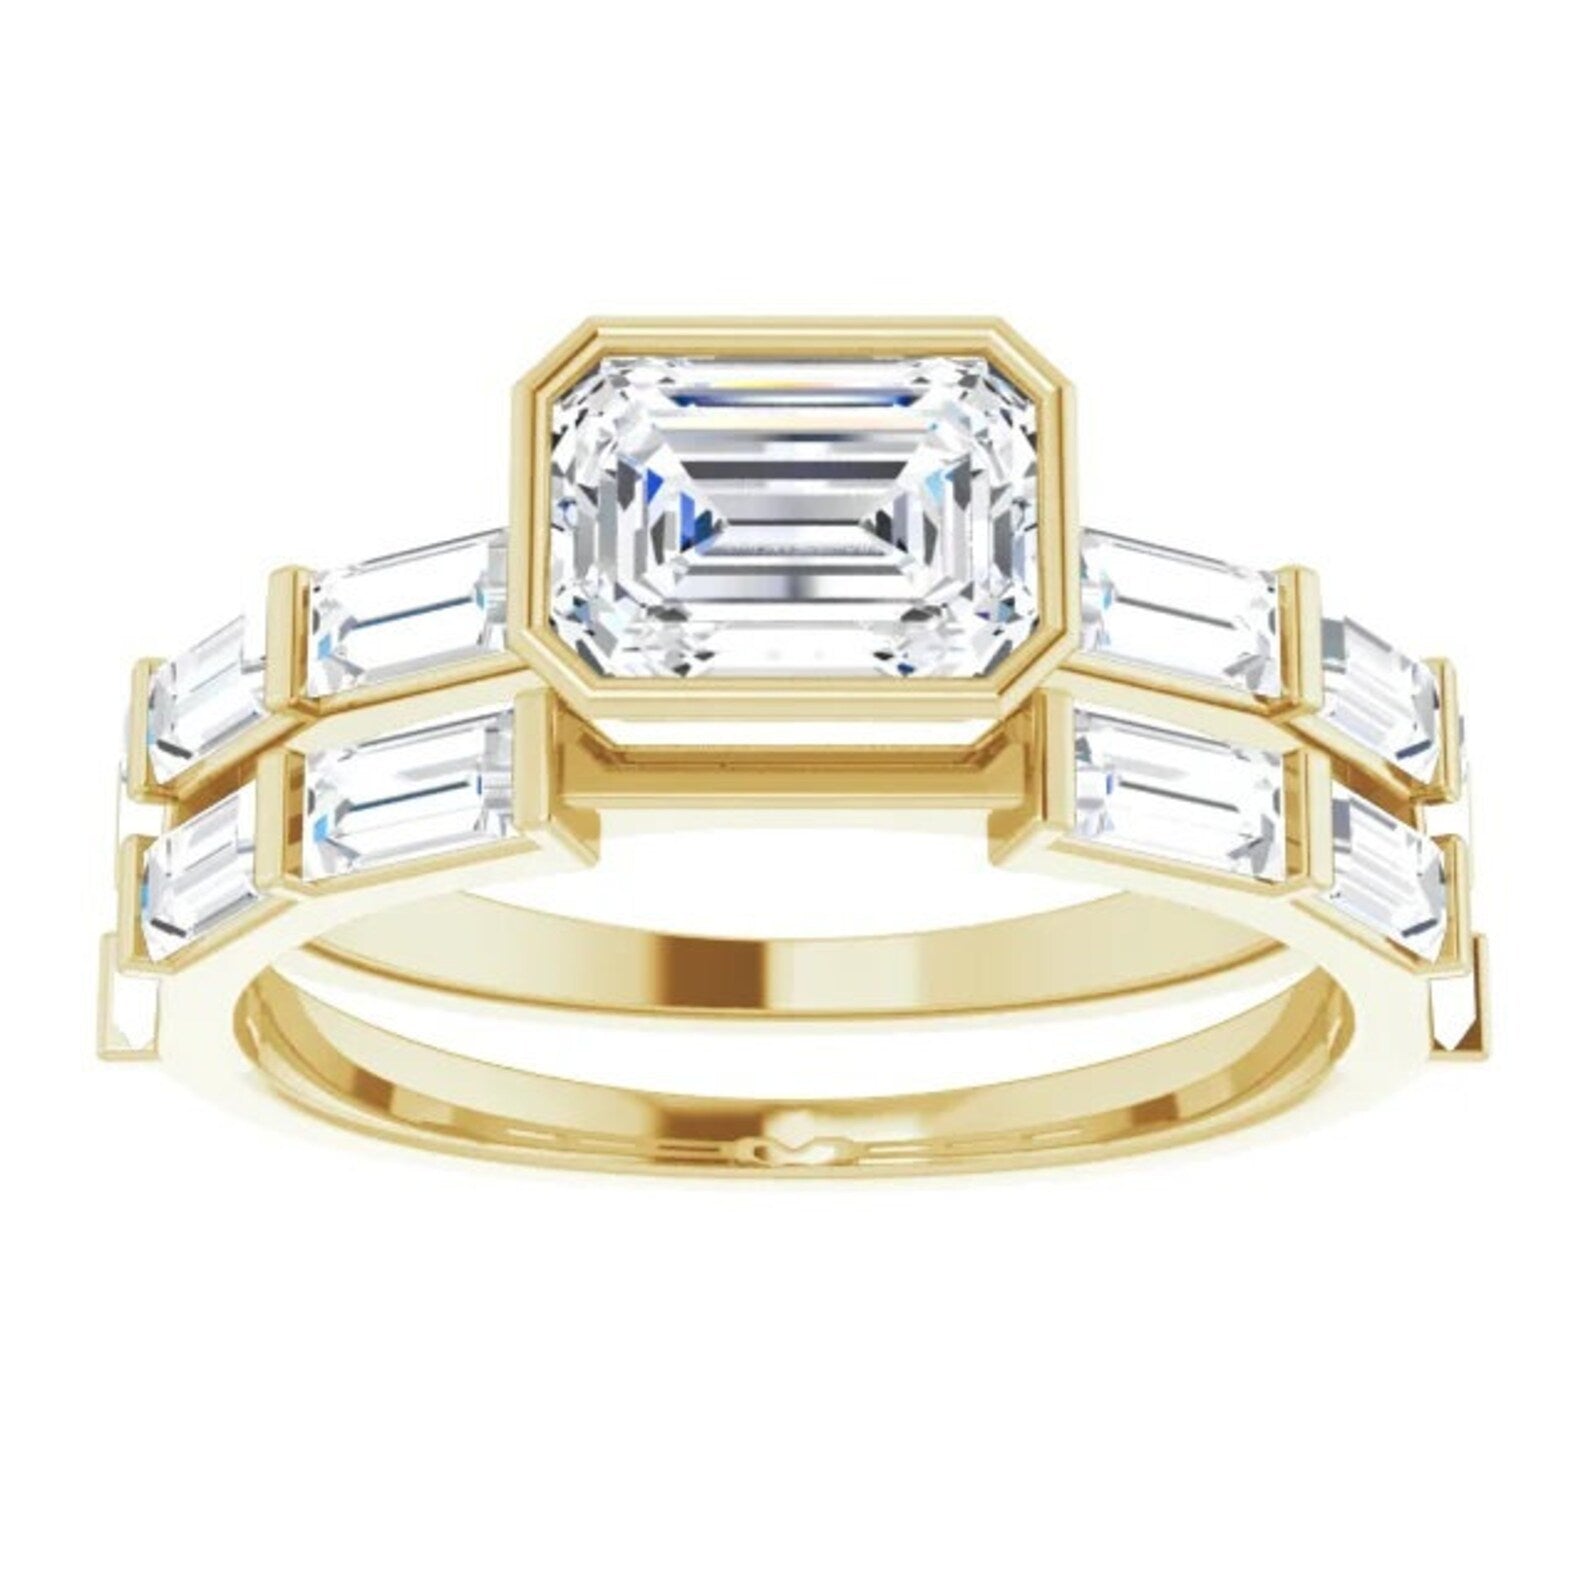 Natural White Sapphire Emerald Cut Engagement Ring